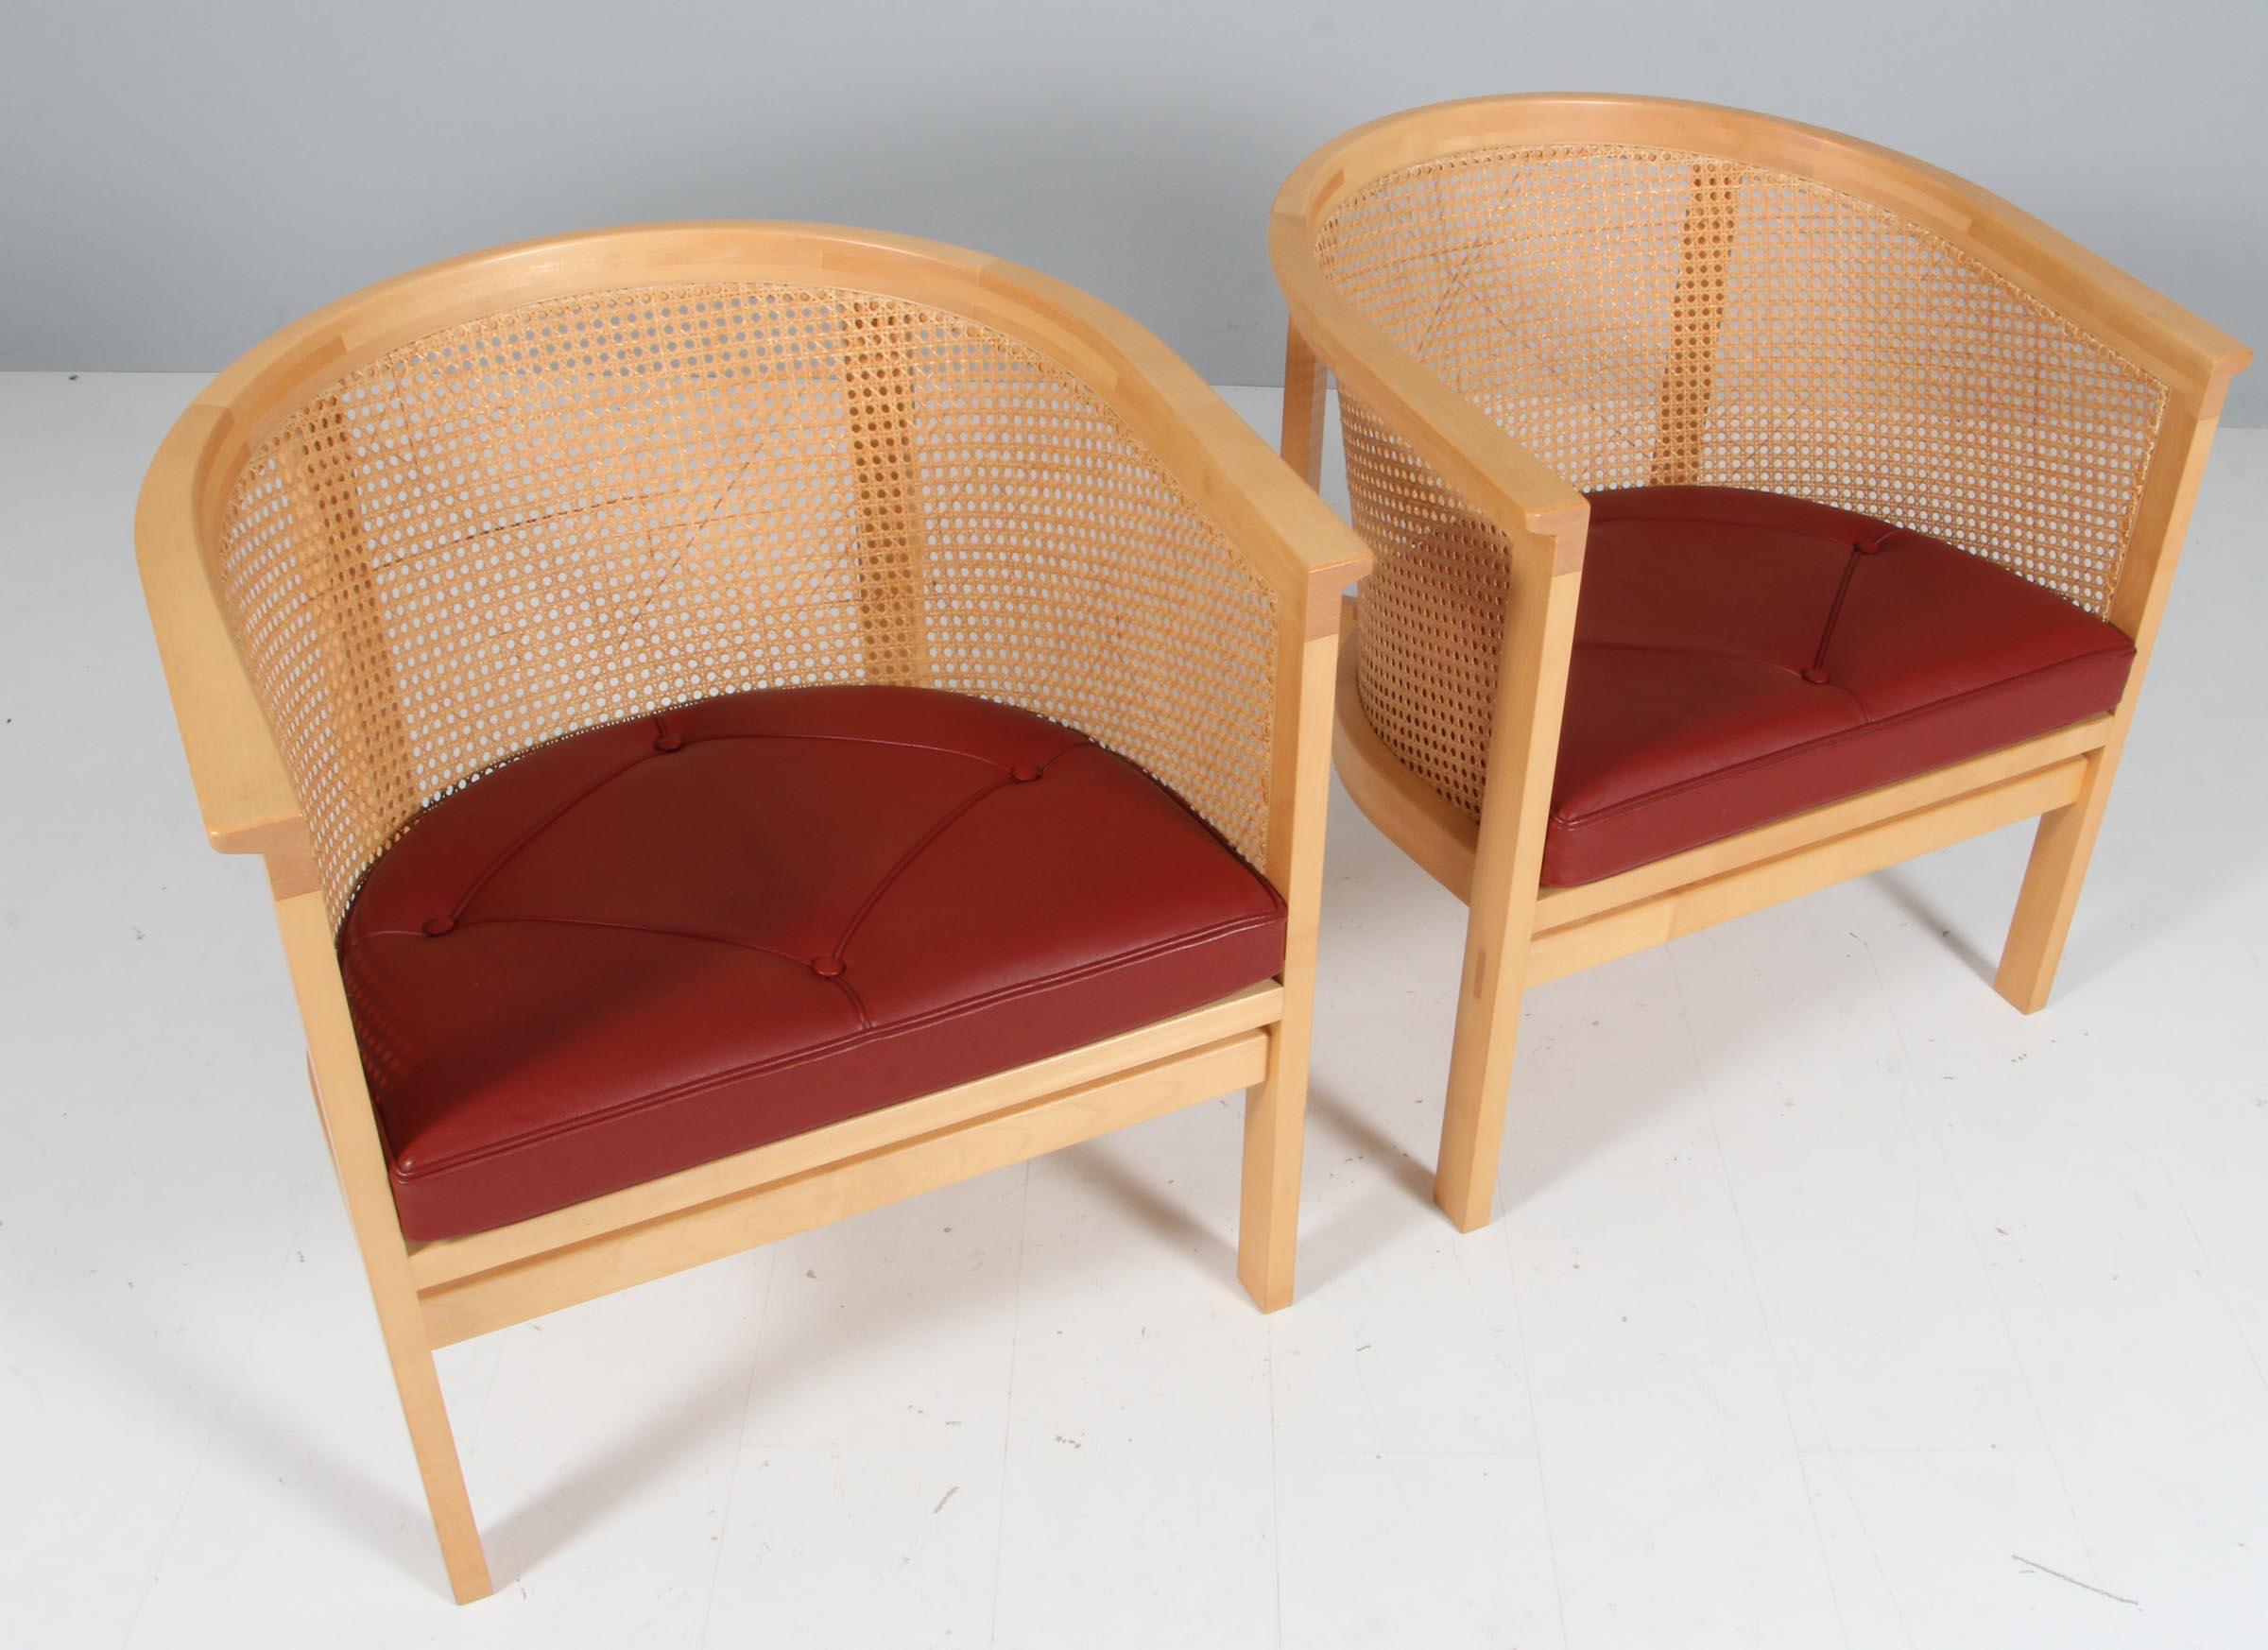 Rud Thygesen & Johnny Sørensen set of two lounge chairs with frame of maple

Cane in the back, original patinated redleather seat cushions.

From 